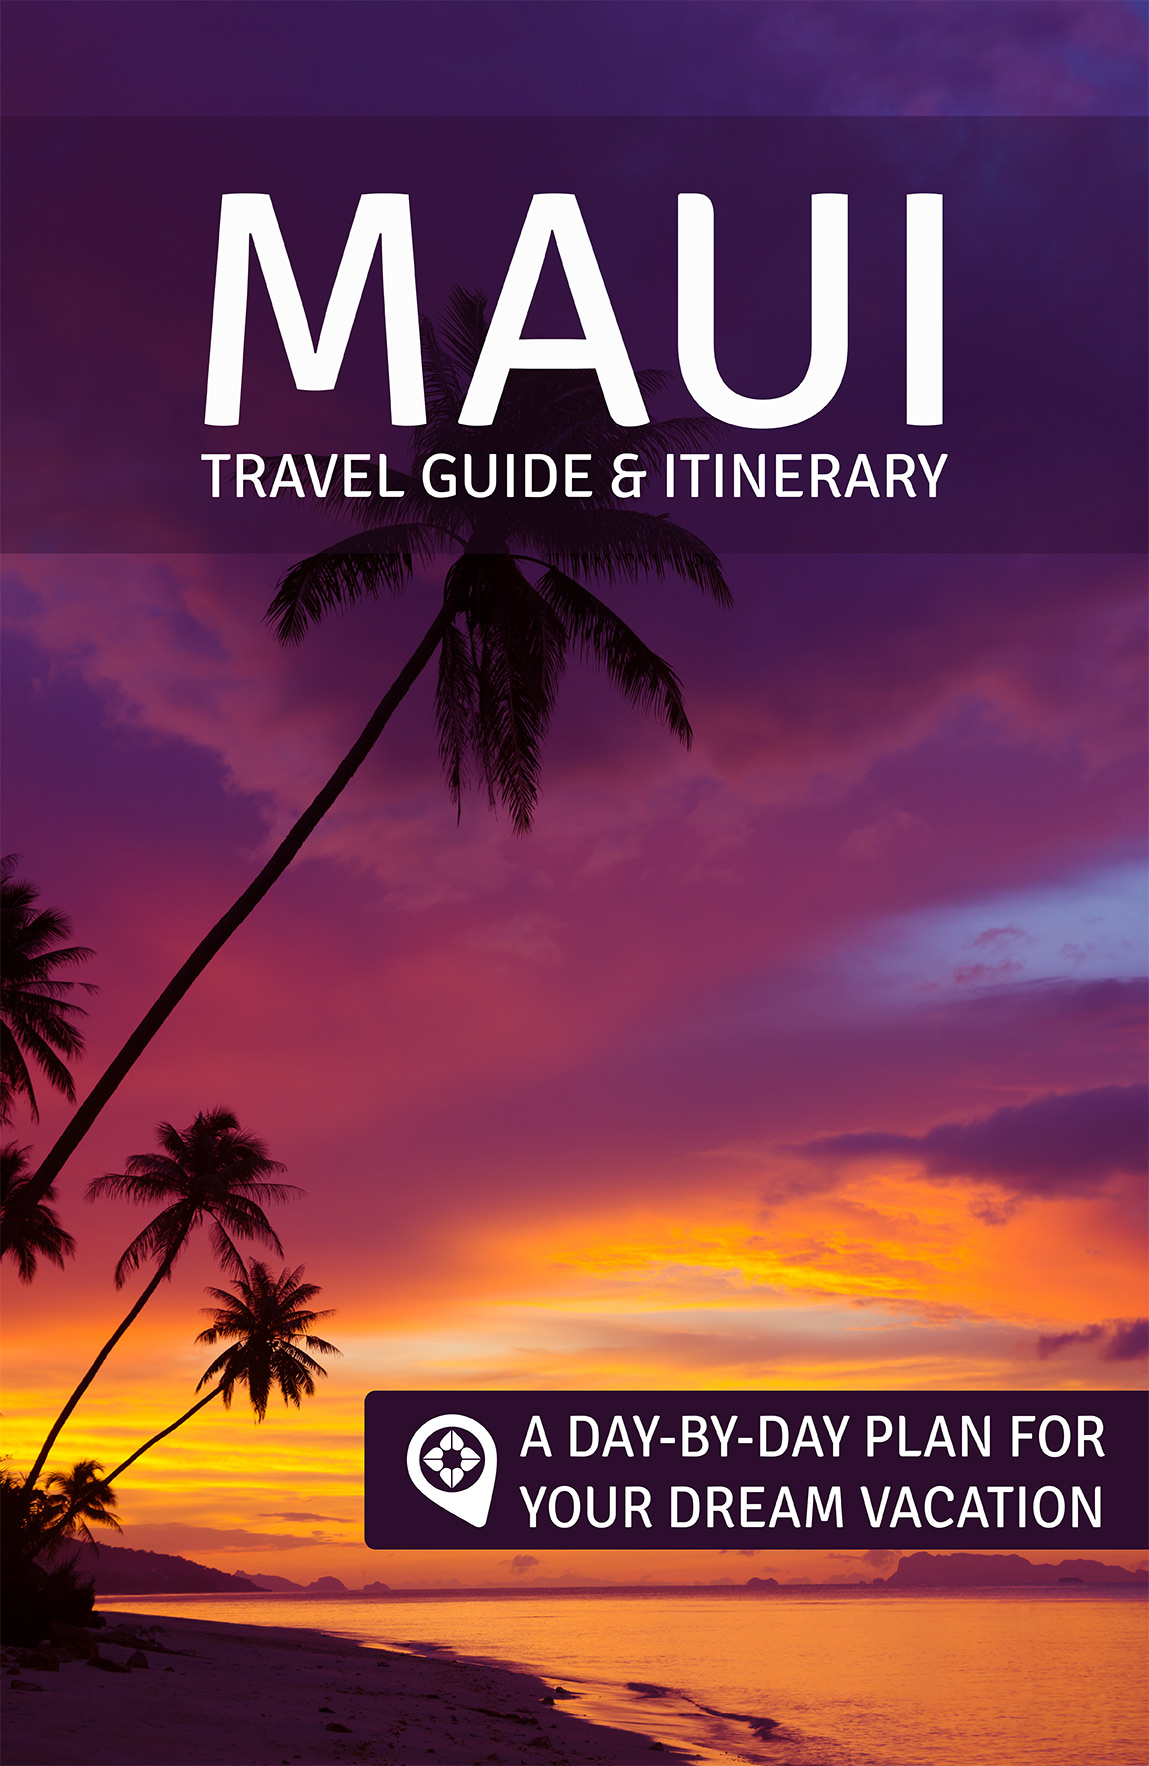 Maui Travel Guide & Itinerary (eBook) Rose + Gully Travel Guides